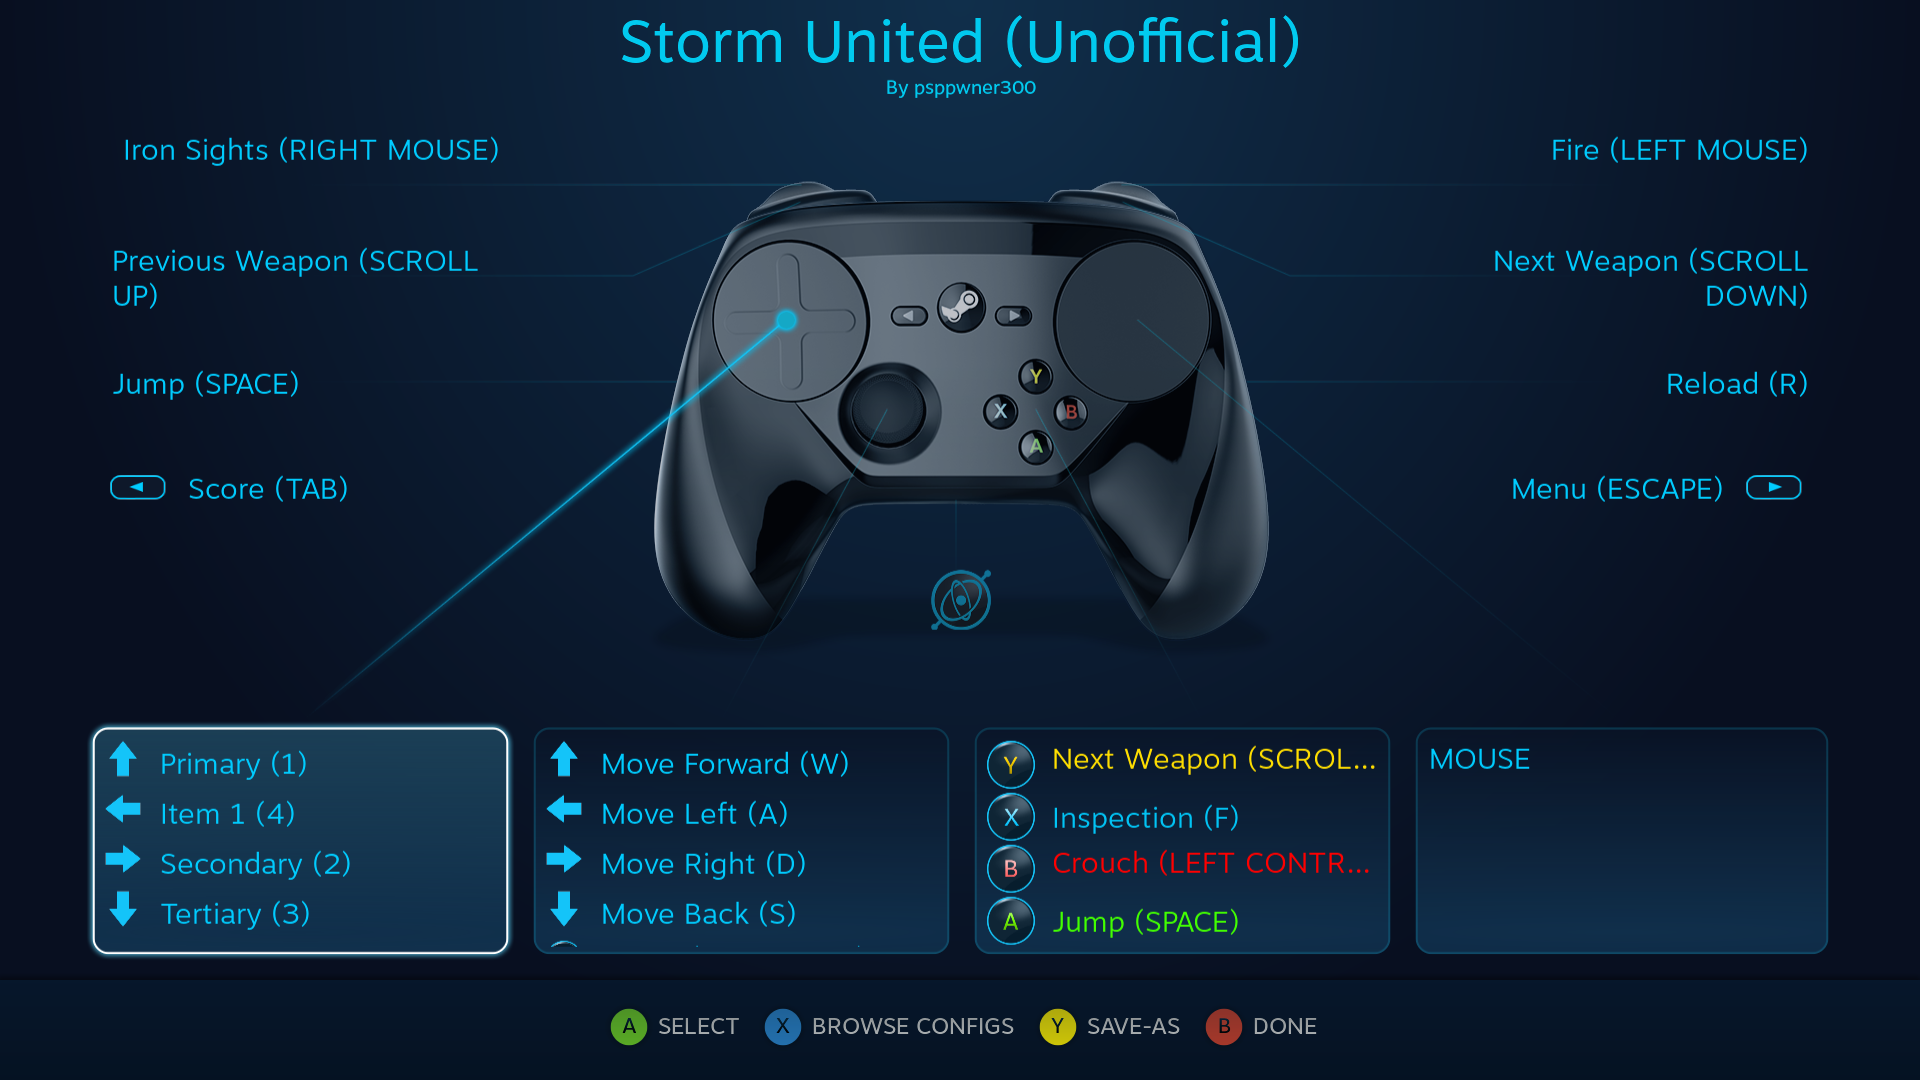 This is what the interface looks like when changing the mappings on your Steam controller